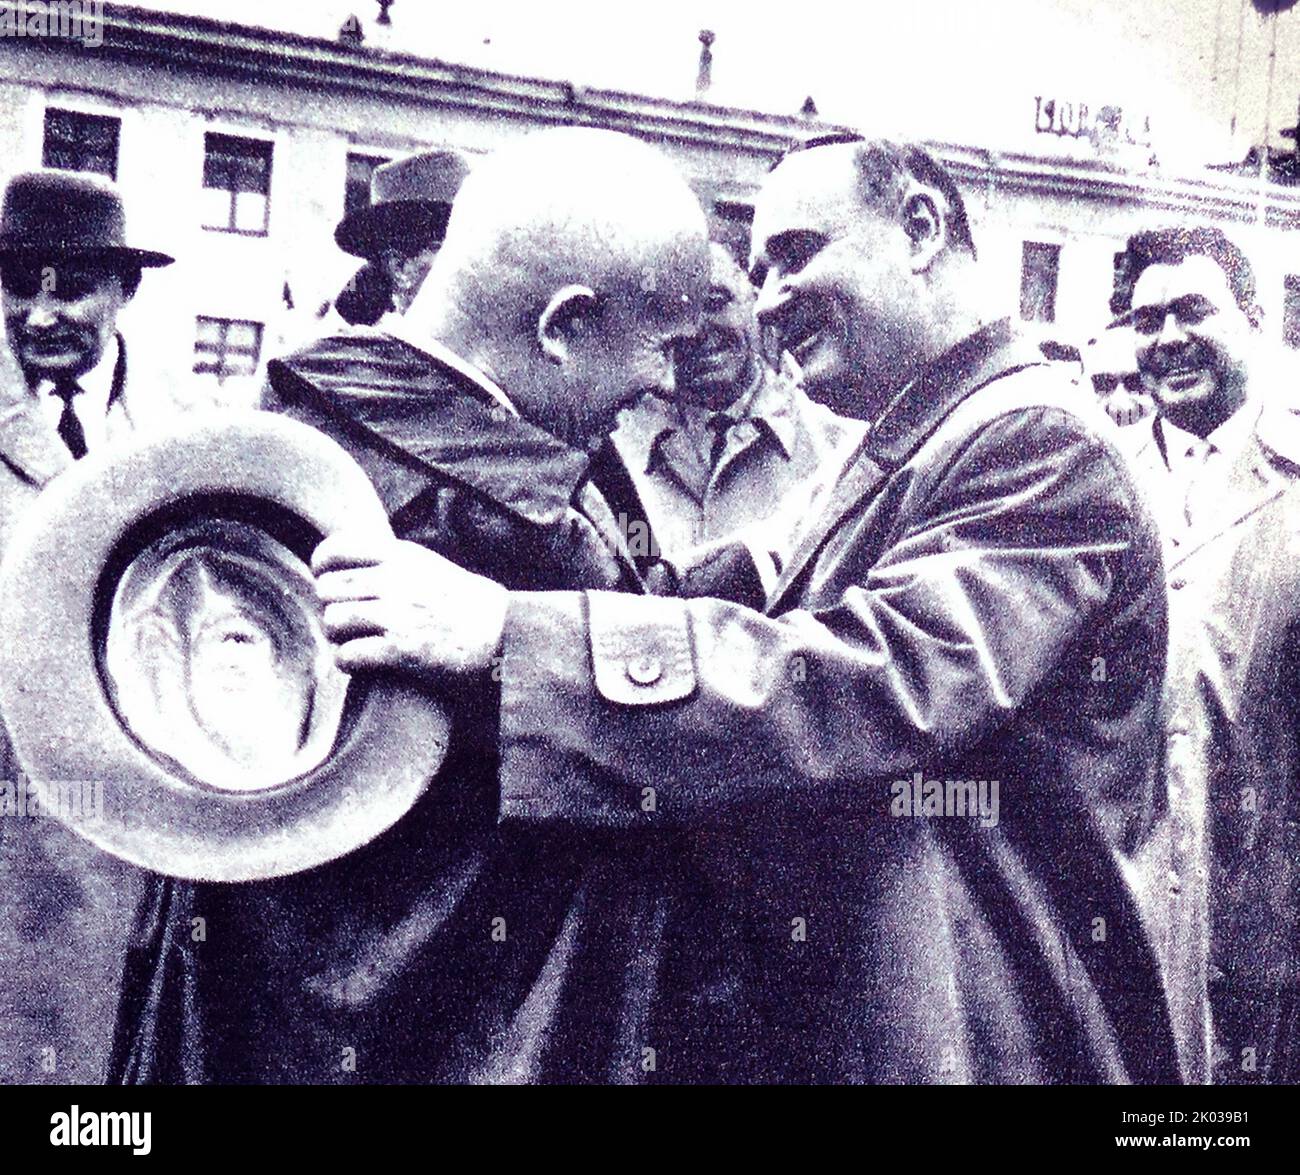 A party and government delegation of the Romanian People's Republic headed by the Chairman of the State Council of the Romanian People's Republic Gheorghe Gheorghiu-Dej paid an official friendly visit to the Soviet Union. The picture shows seeing off the guests at the Vnukovo airfield. Alexei Kosygin and Leonid Brezhnev are also seen here. Stock Photo